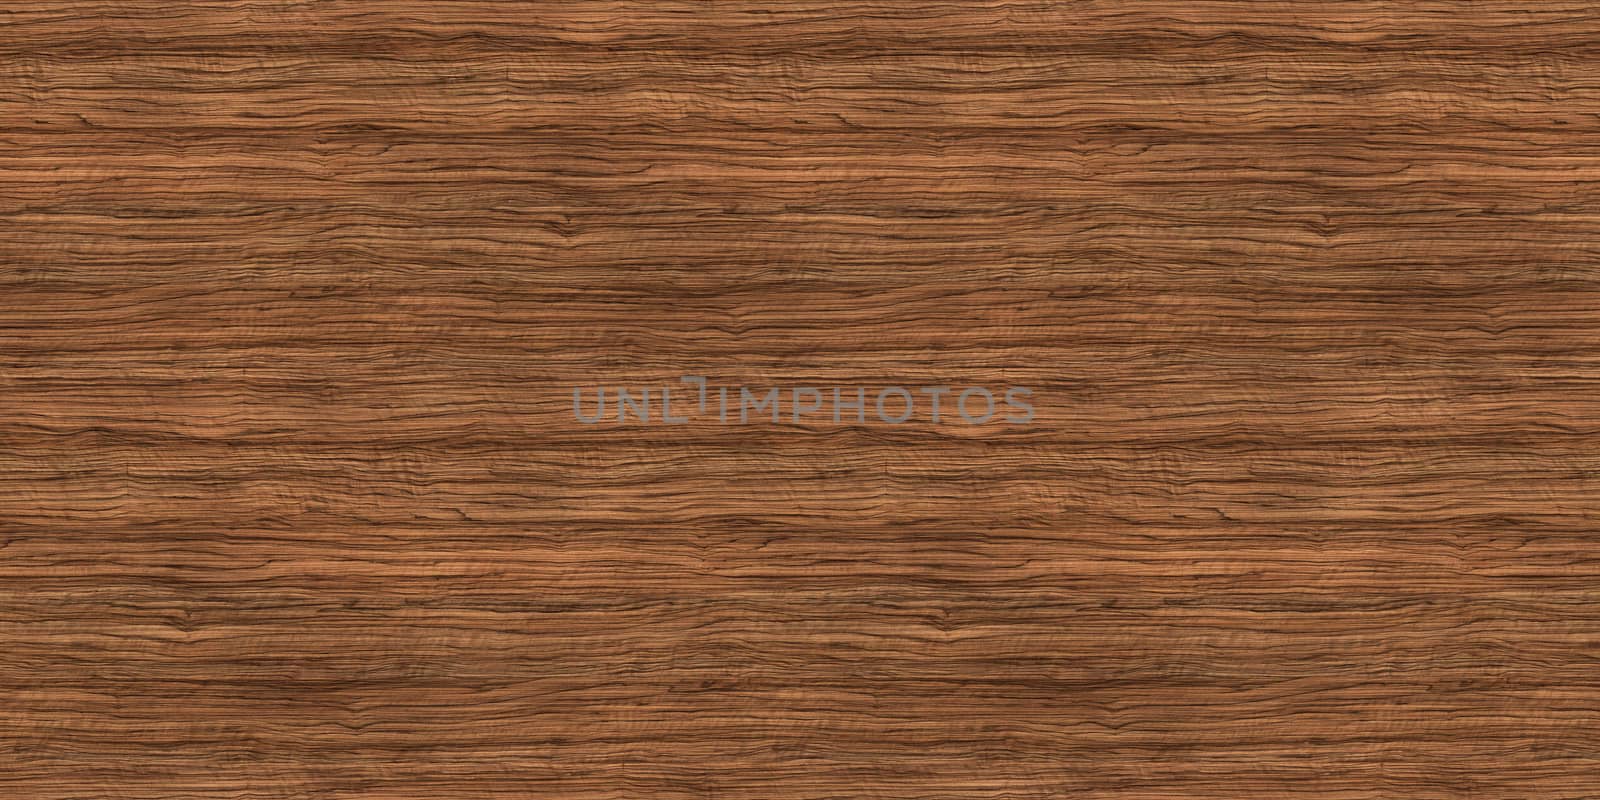 grunge wood pattern texture background, wooden table by ivo_13